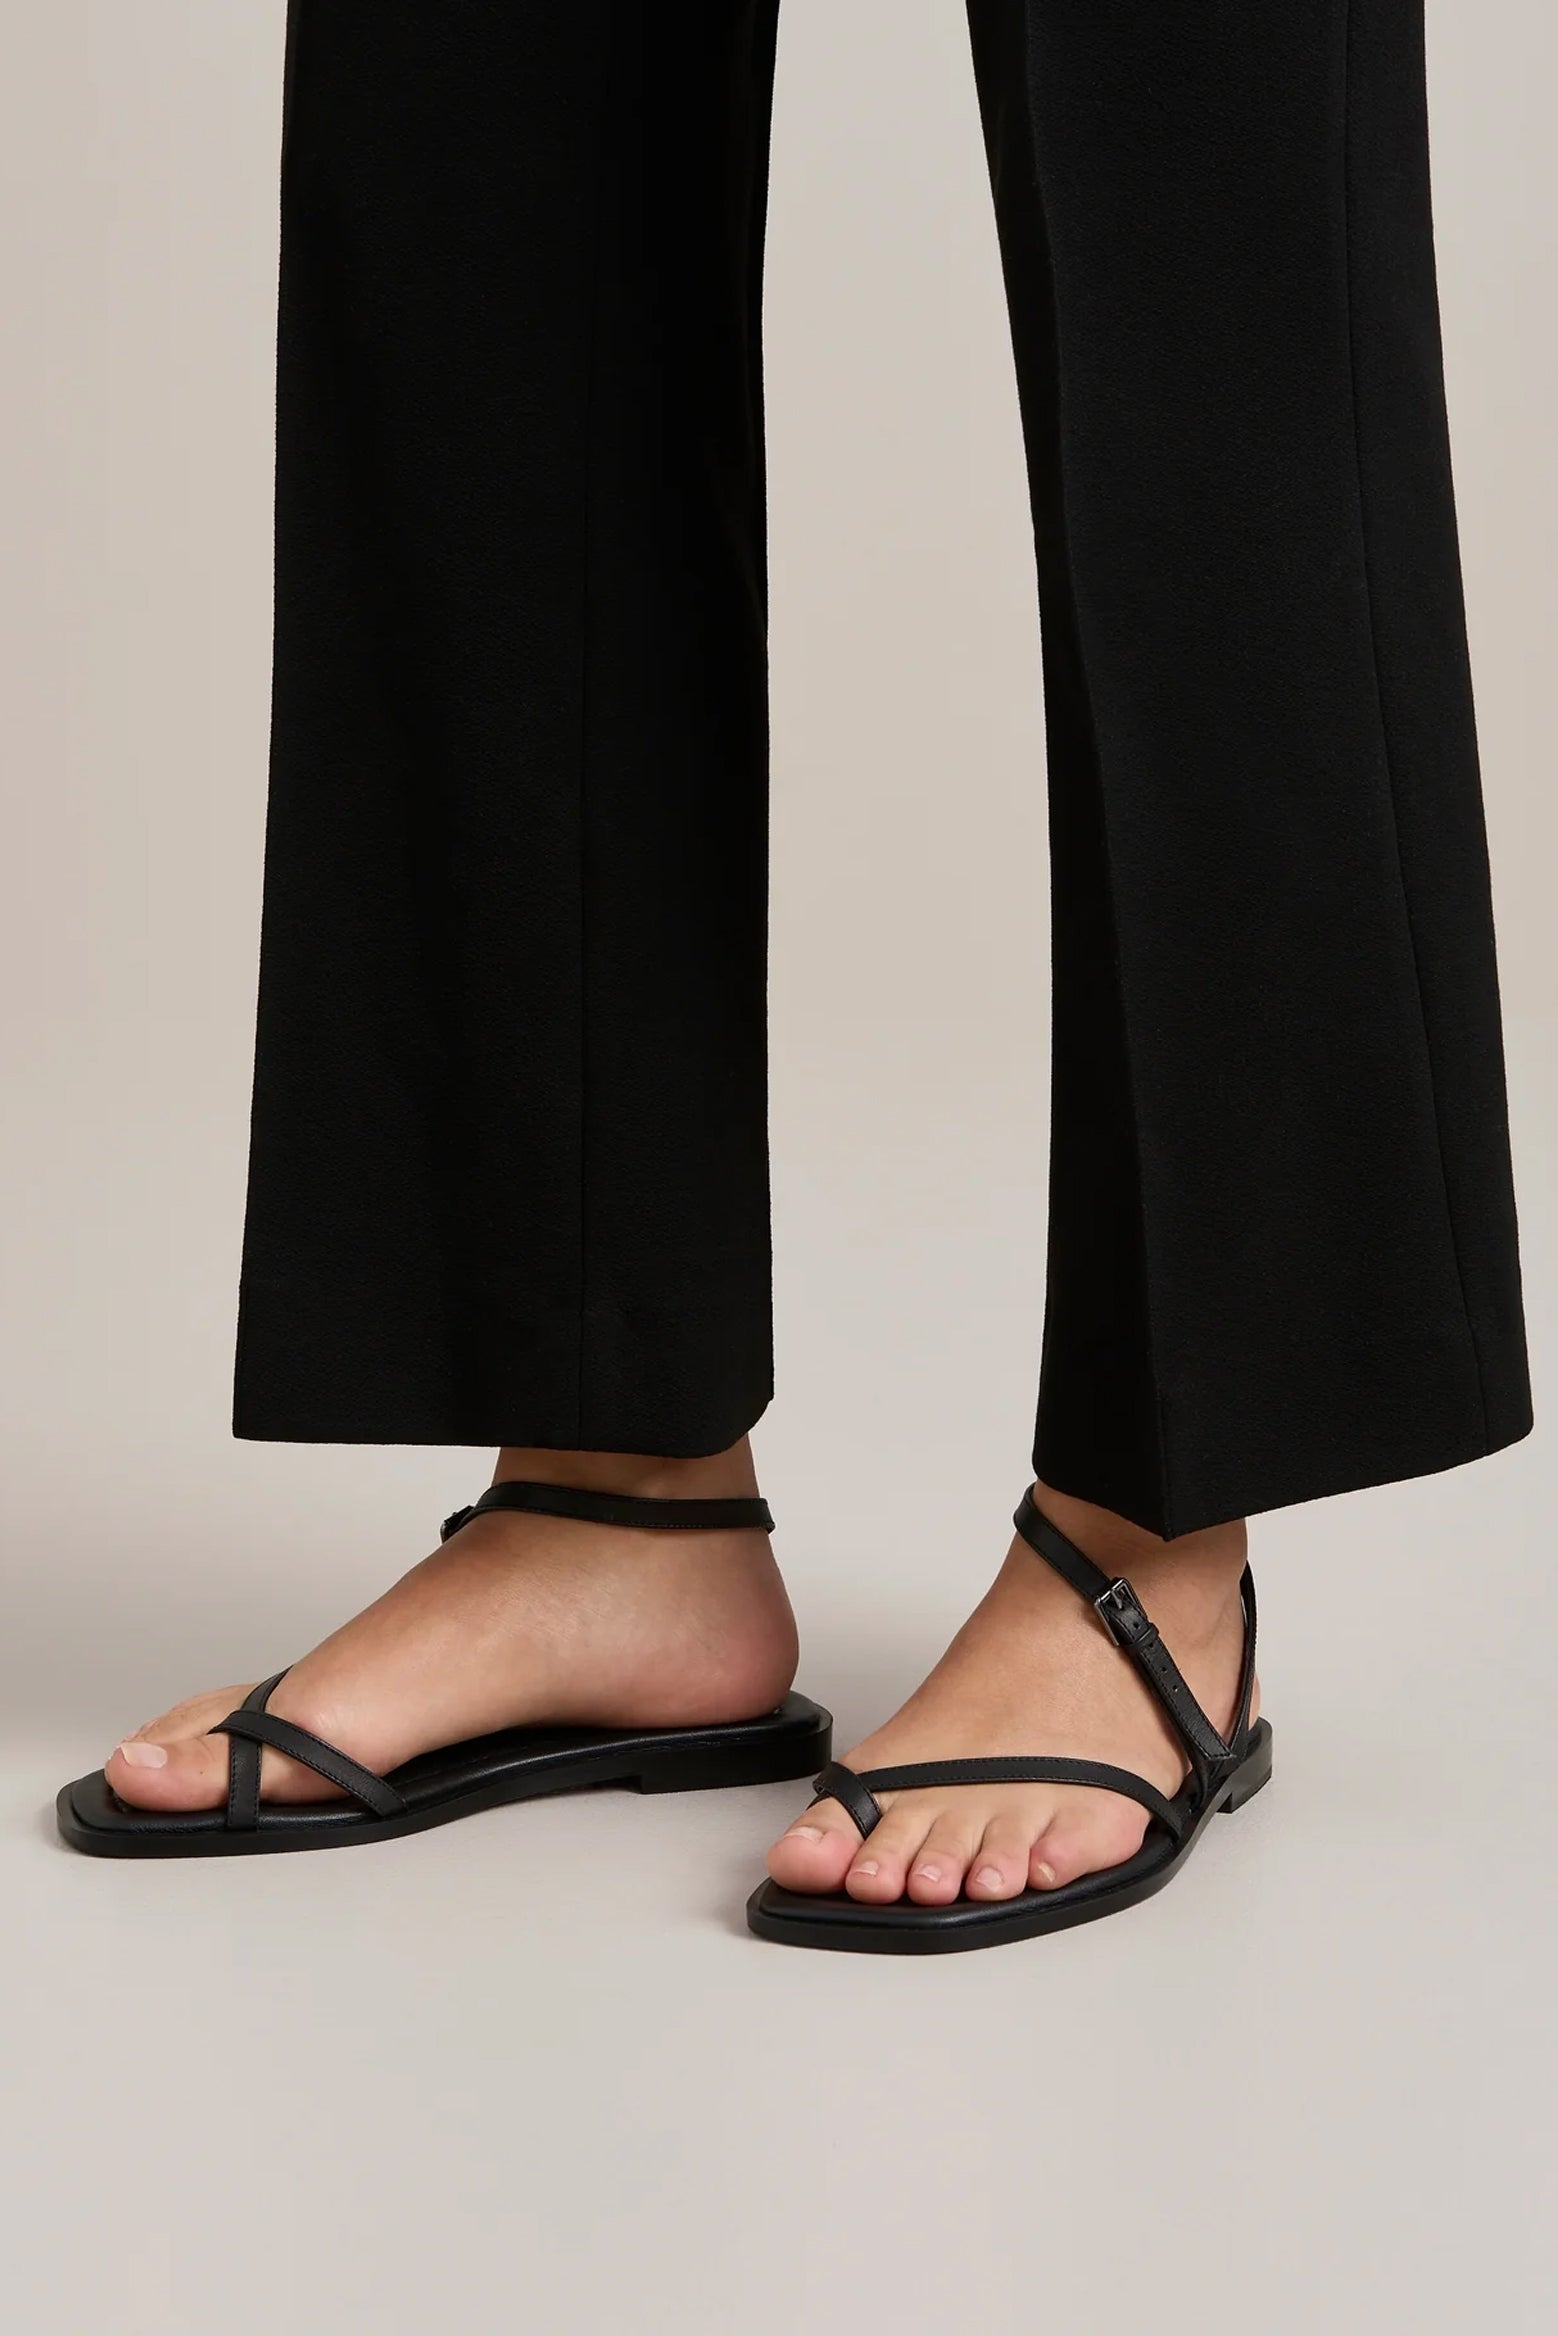 A.Emery Lucia Sandal in Black available at The New Trend Australia.